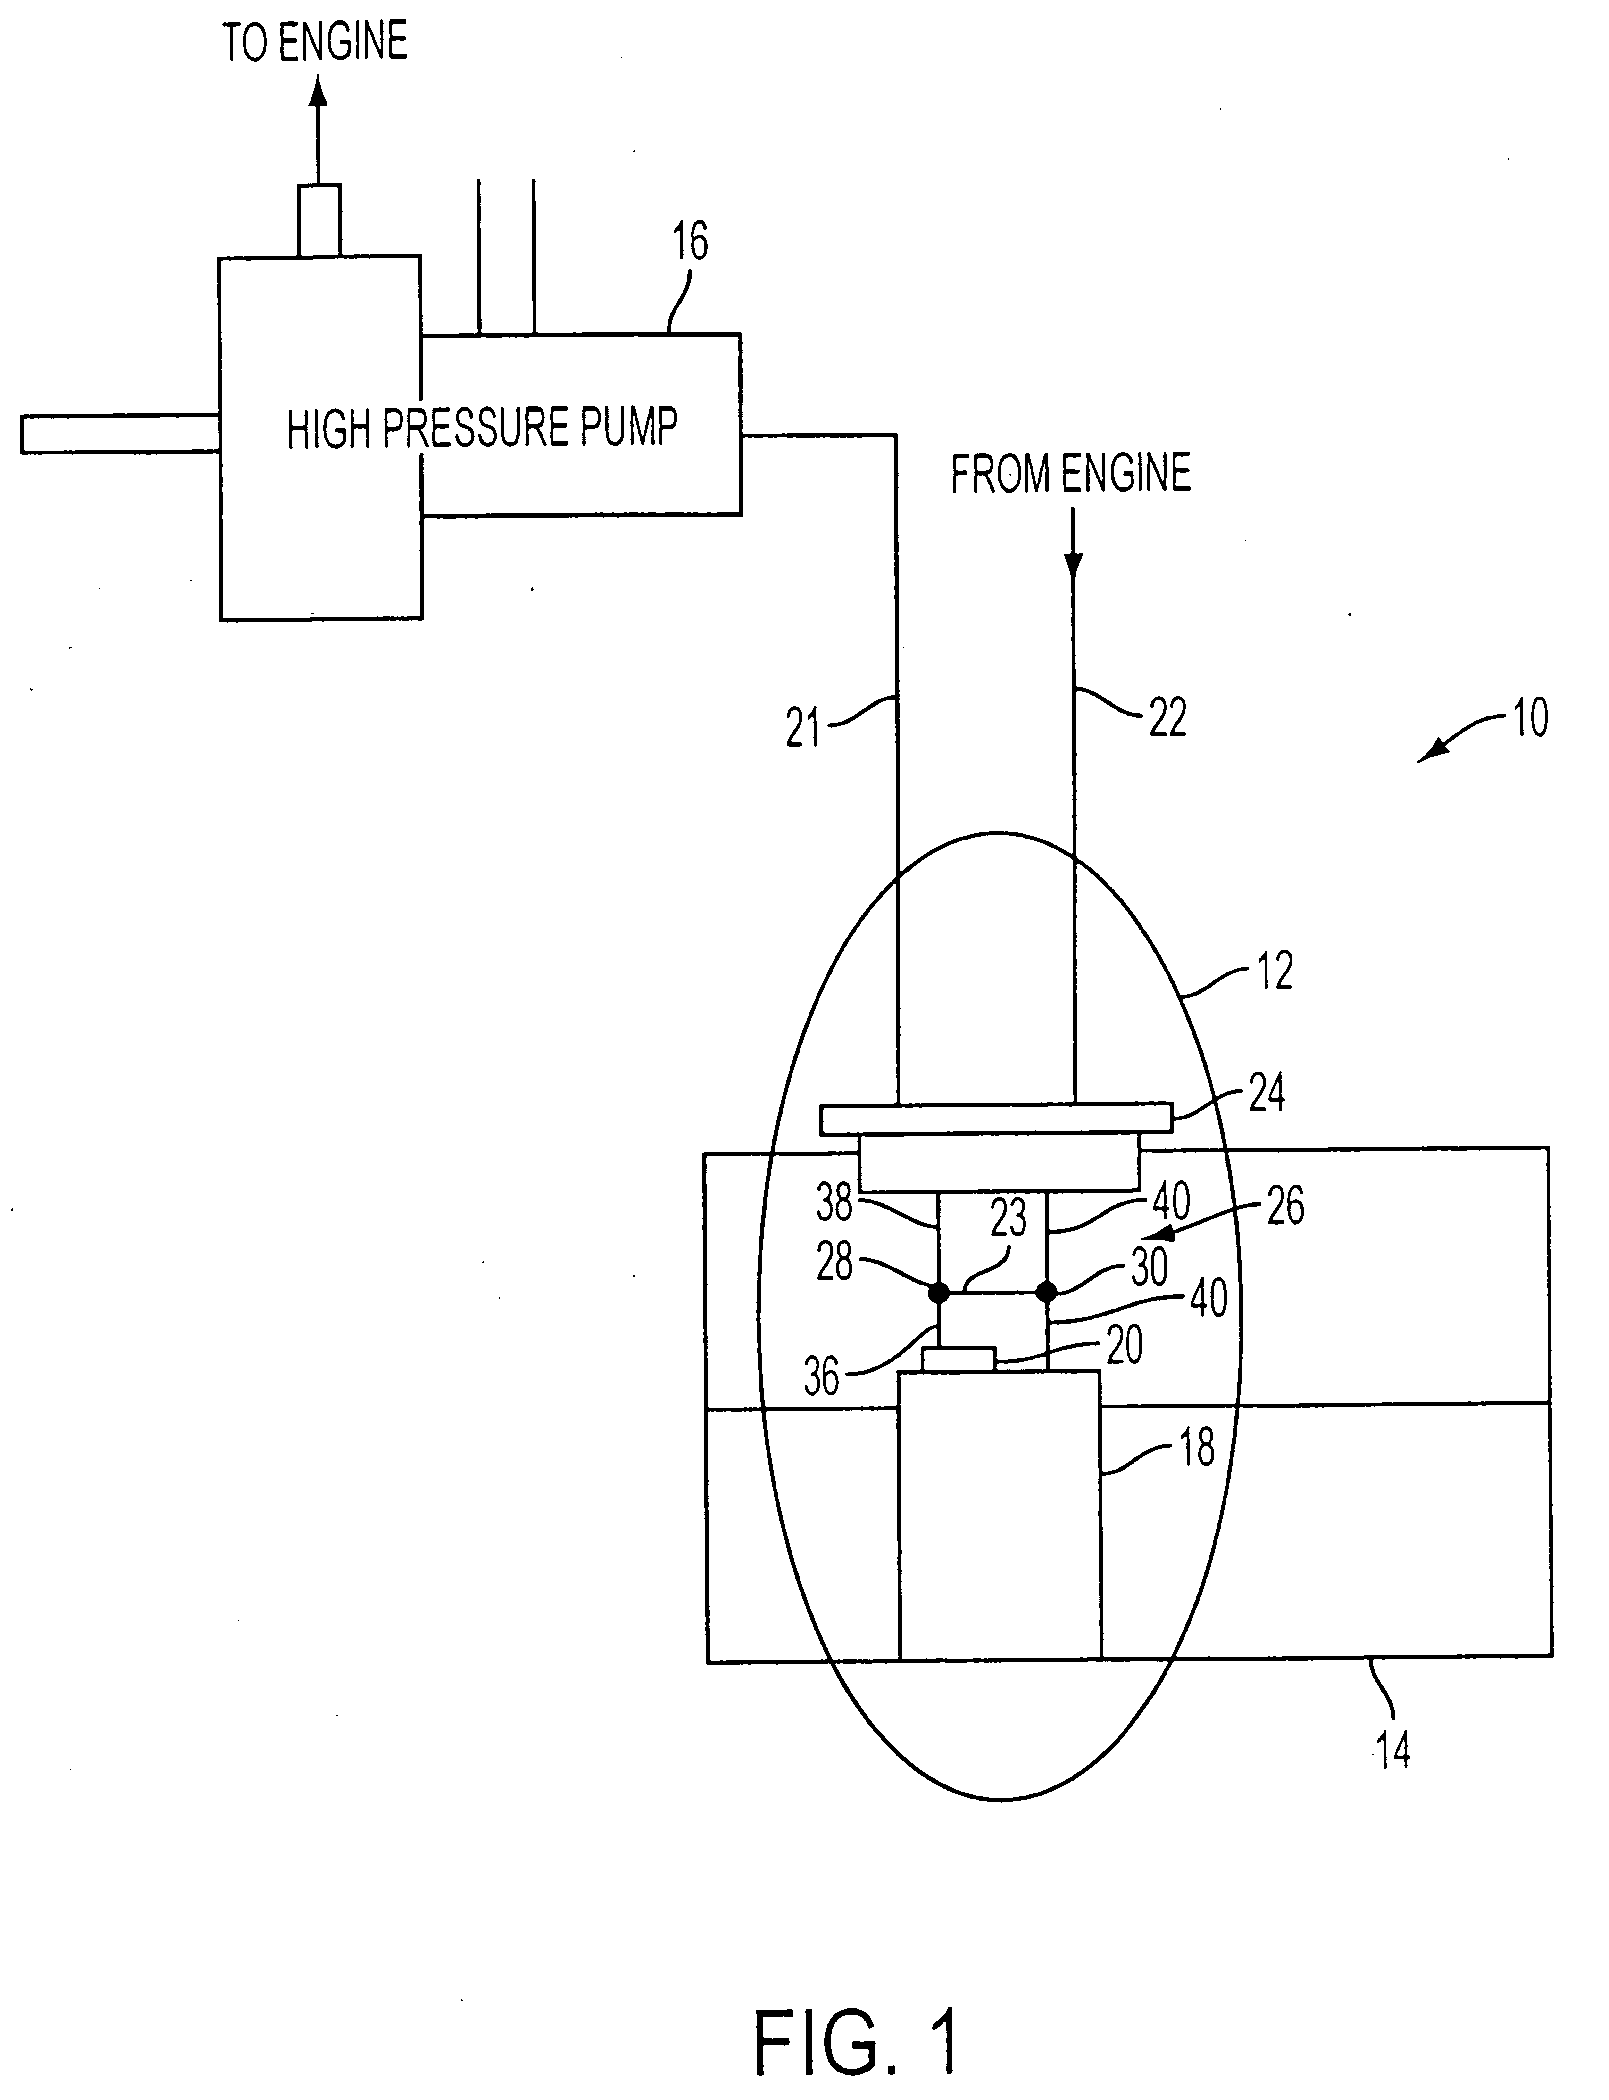 Coupling valve structure for fuel supply module